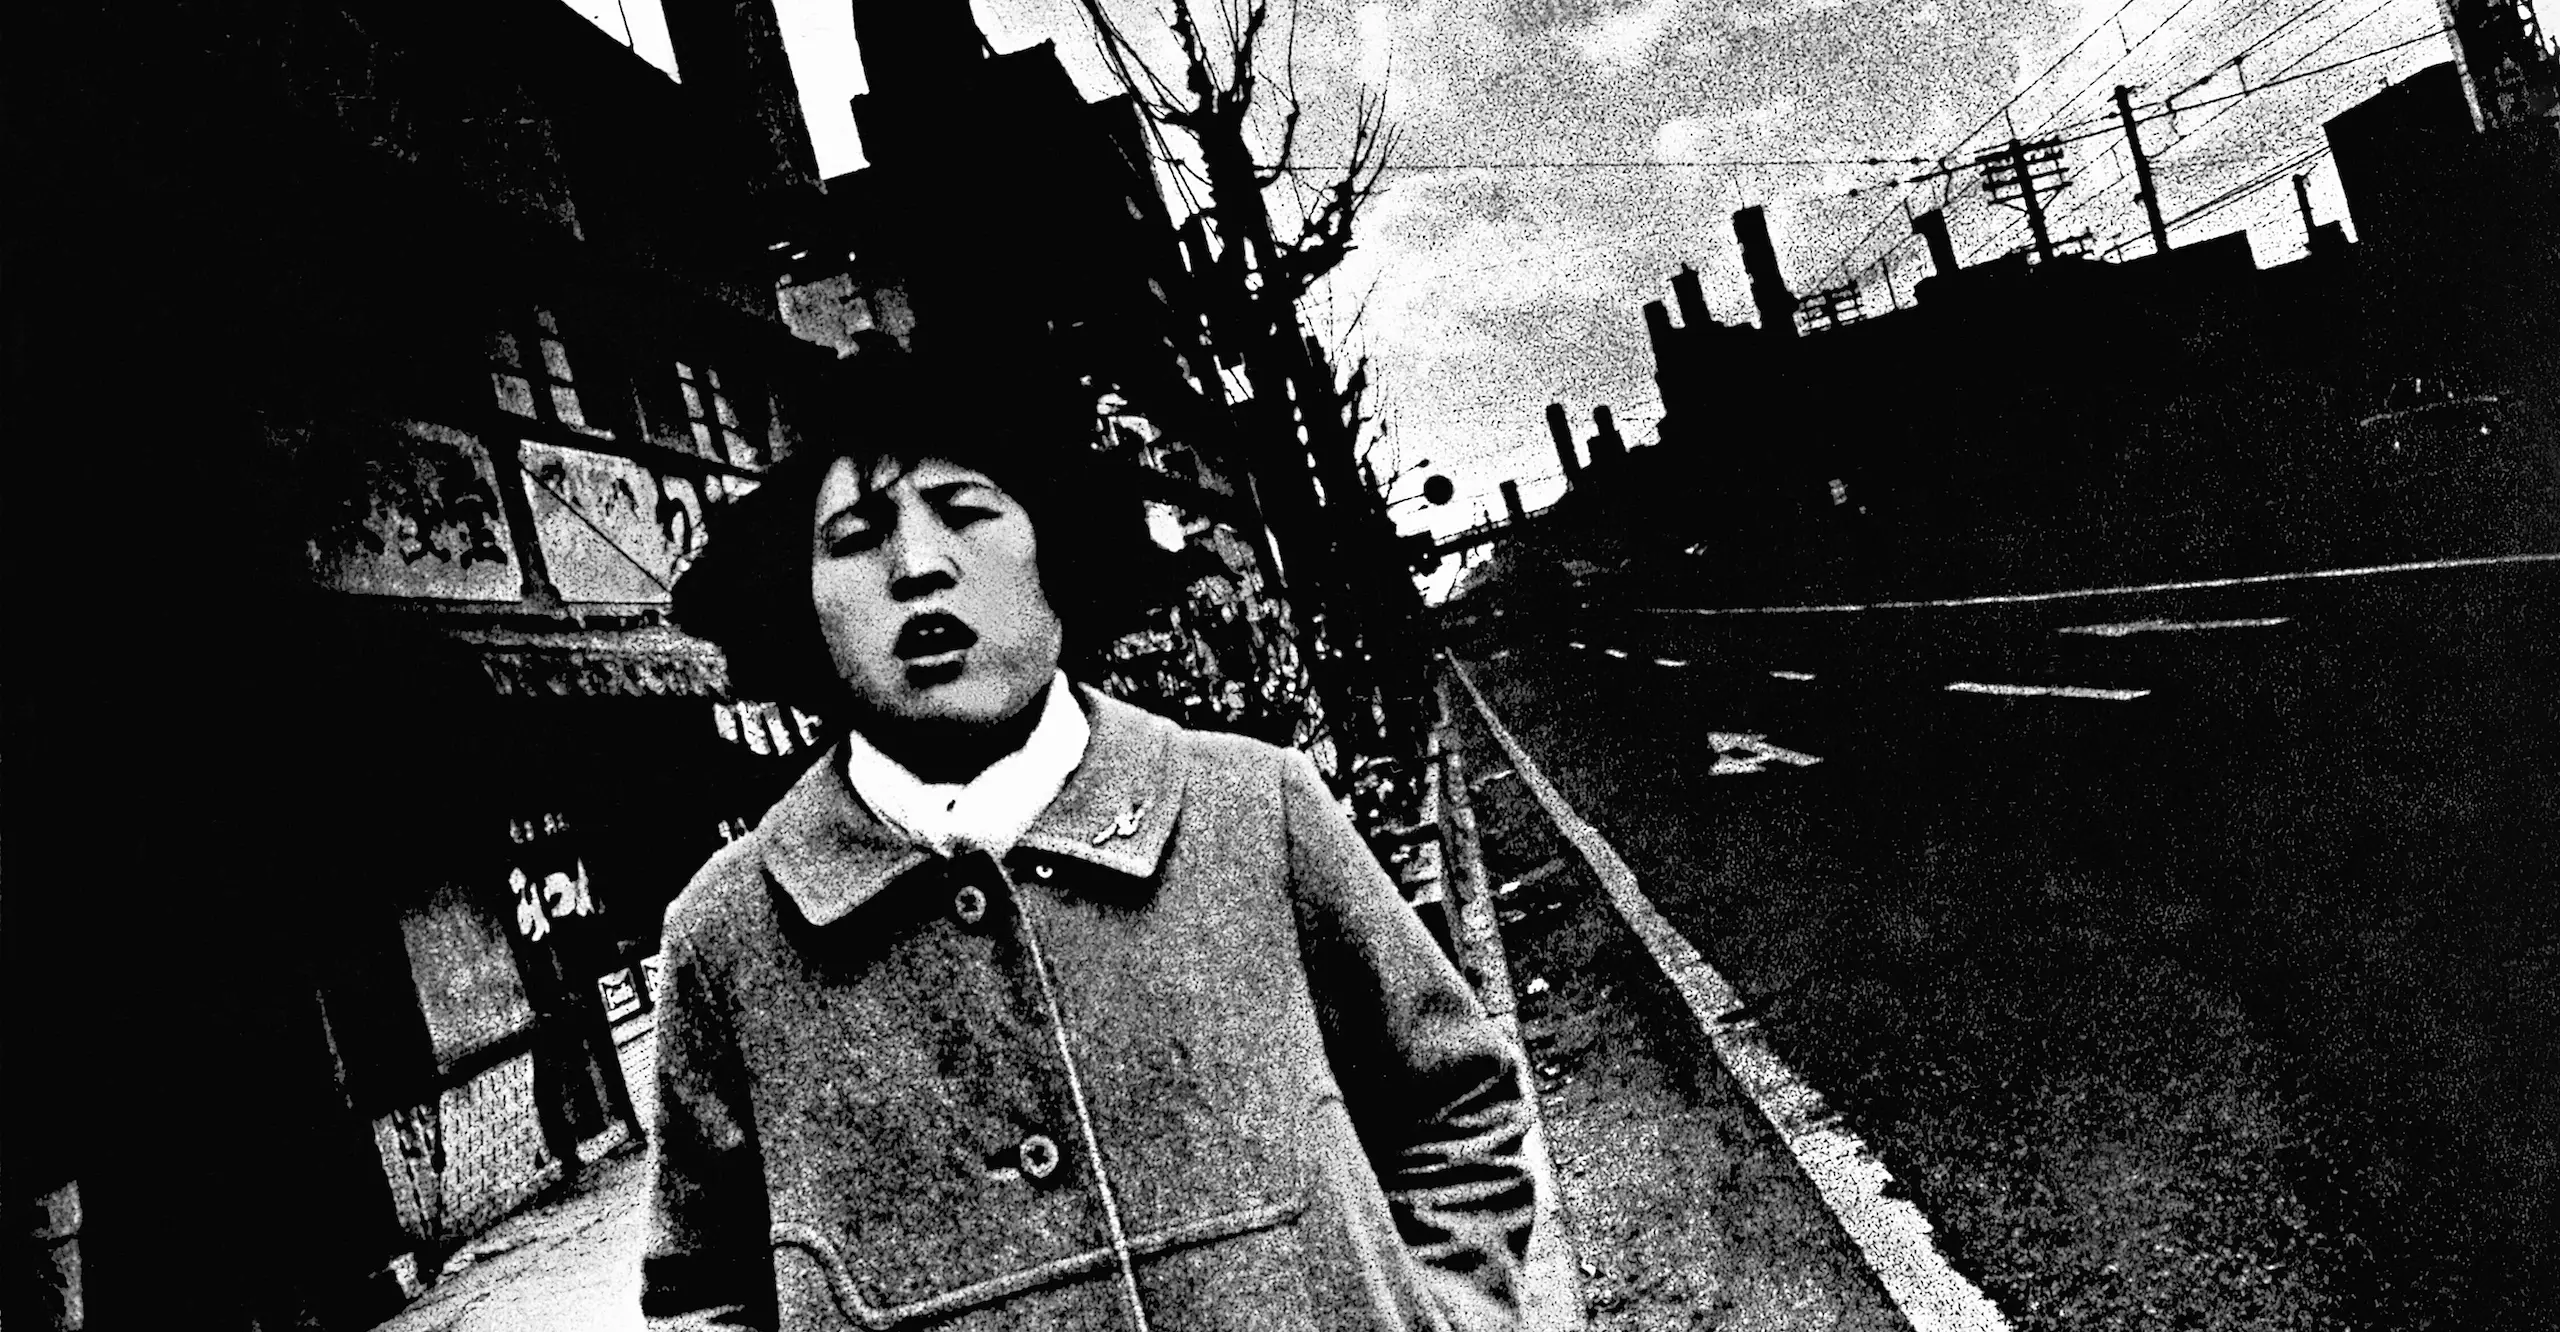 High contrast black and white photograph of a tilted street scene with an open mouthed young person